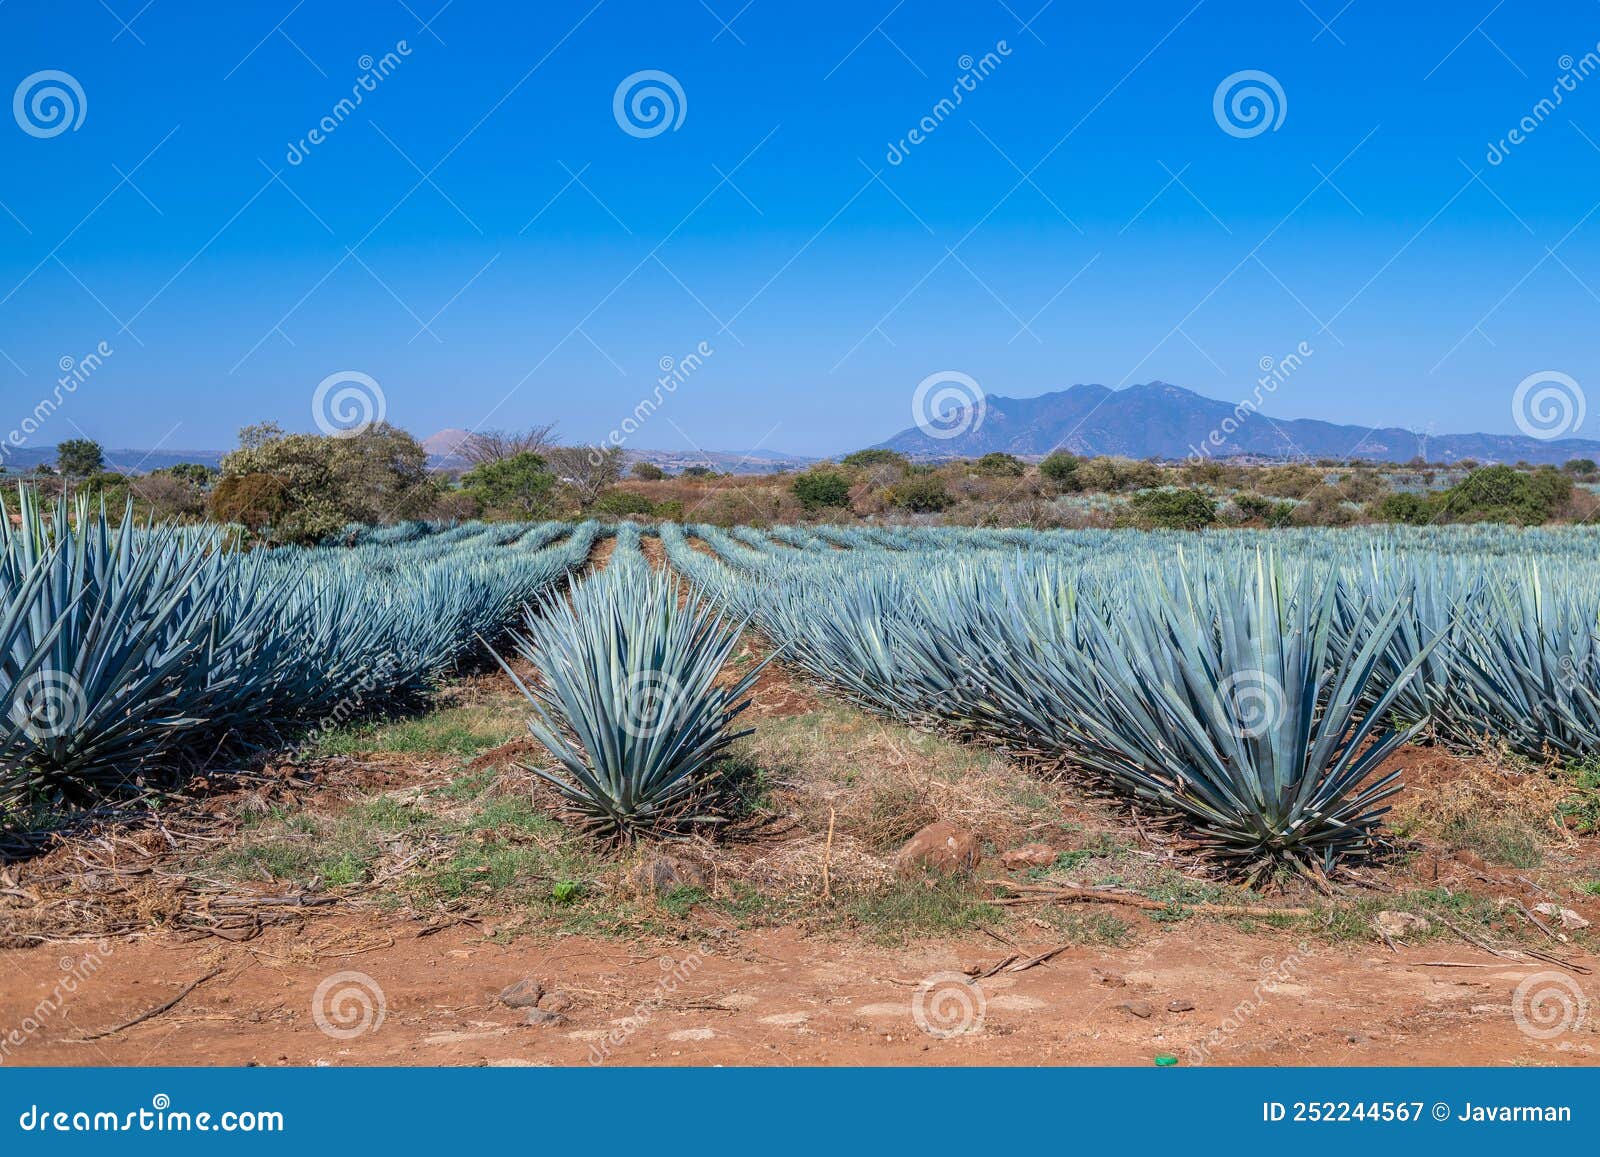 blue agave field in tequila, jalisco, mexico